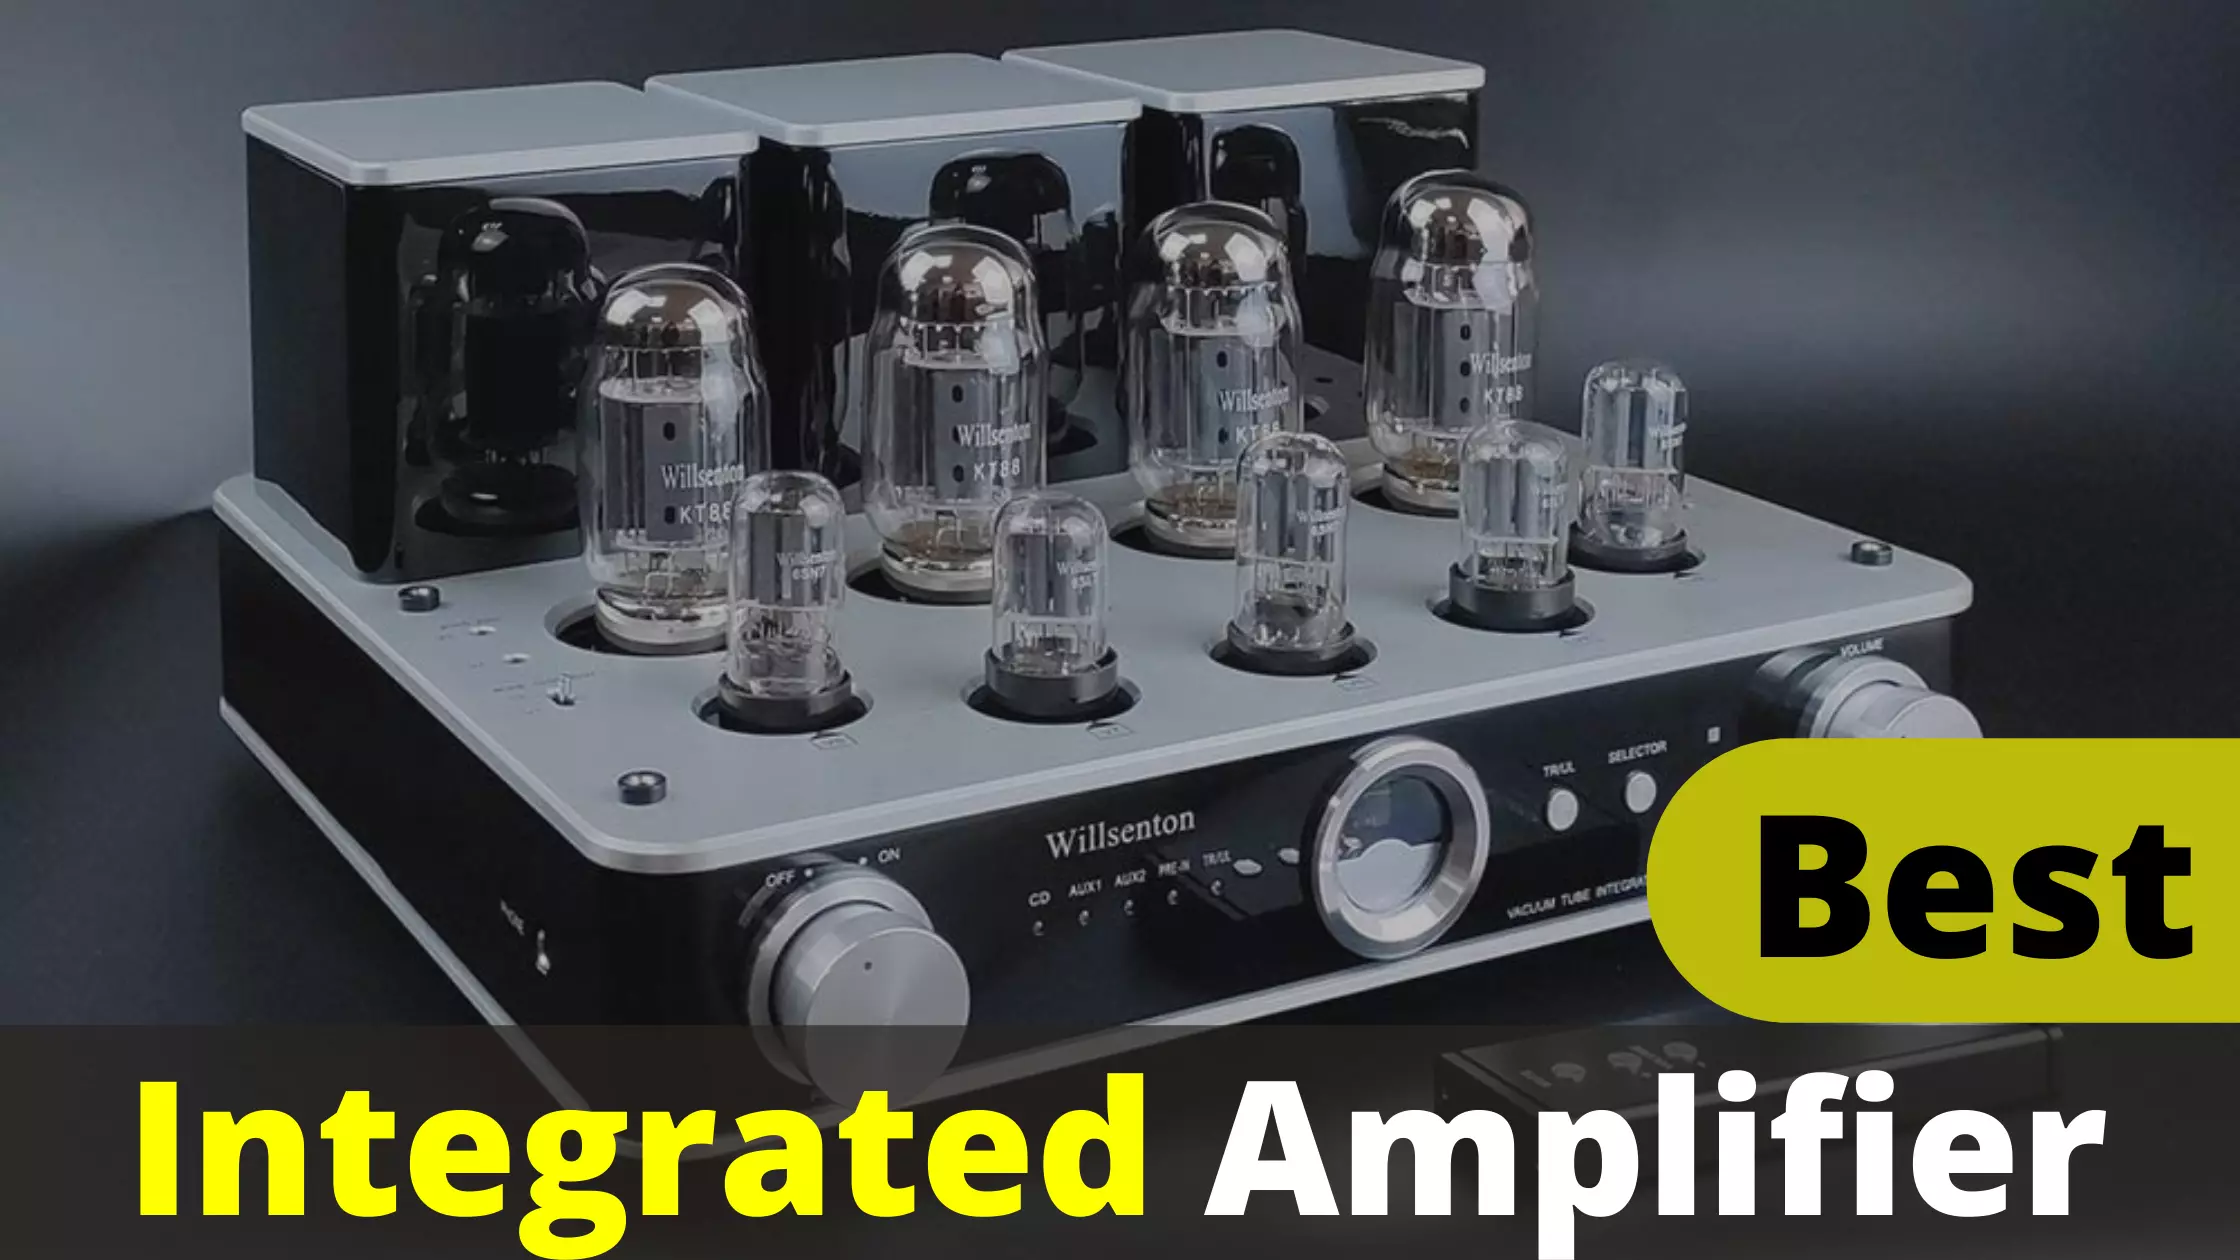 Best Integrated Amplifier - Buying Guide and Reviews